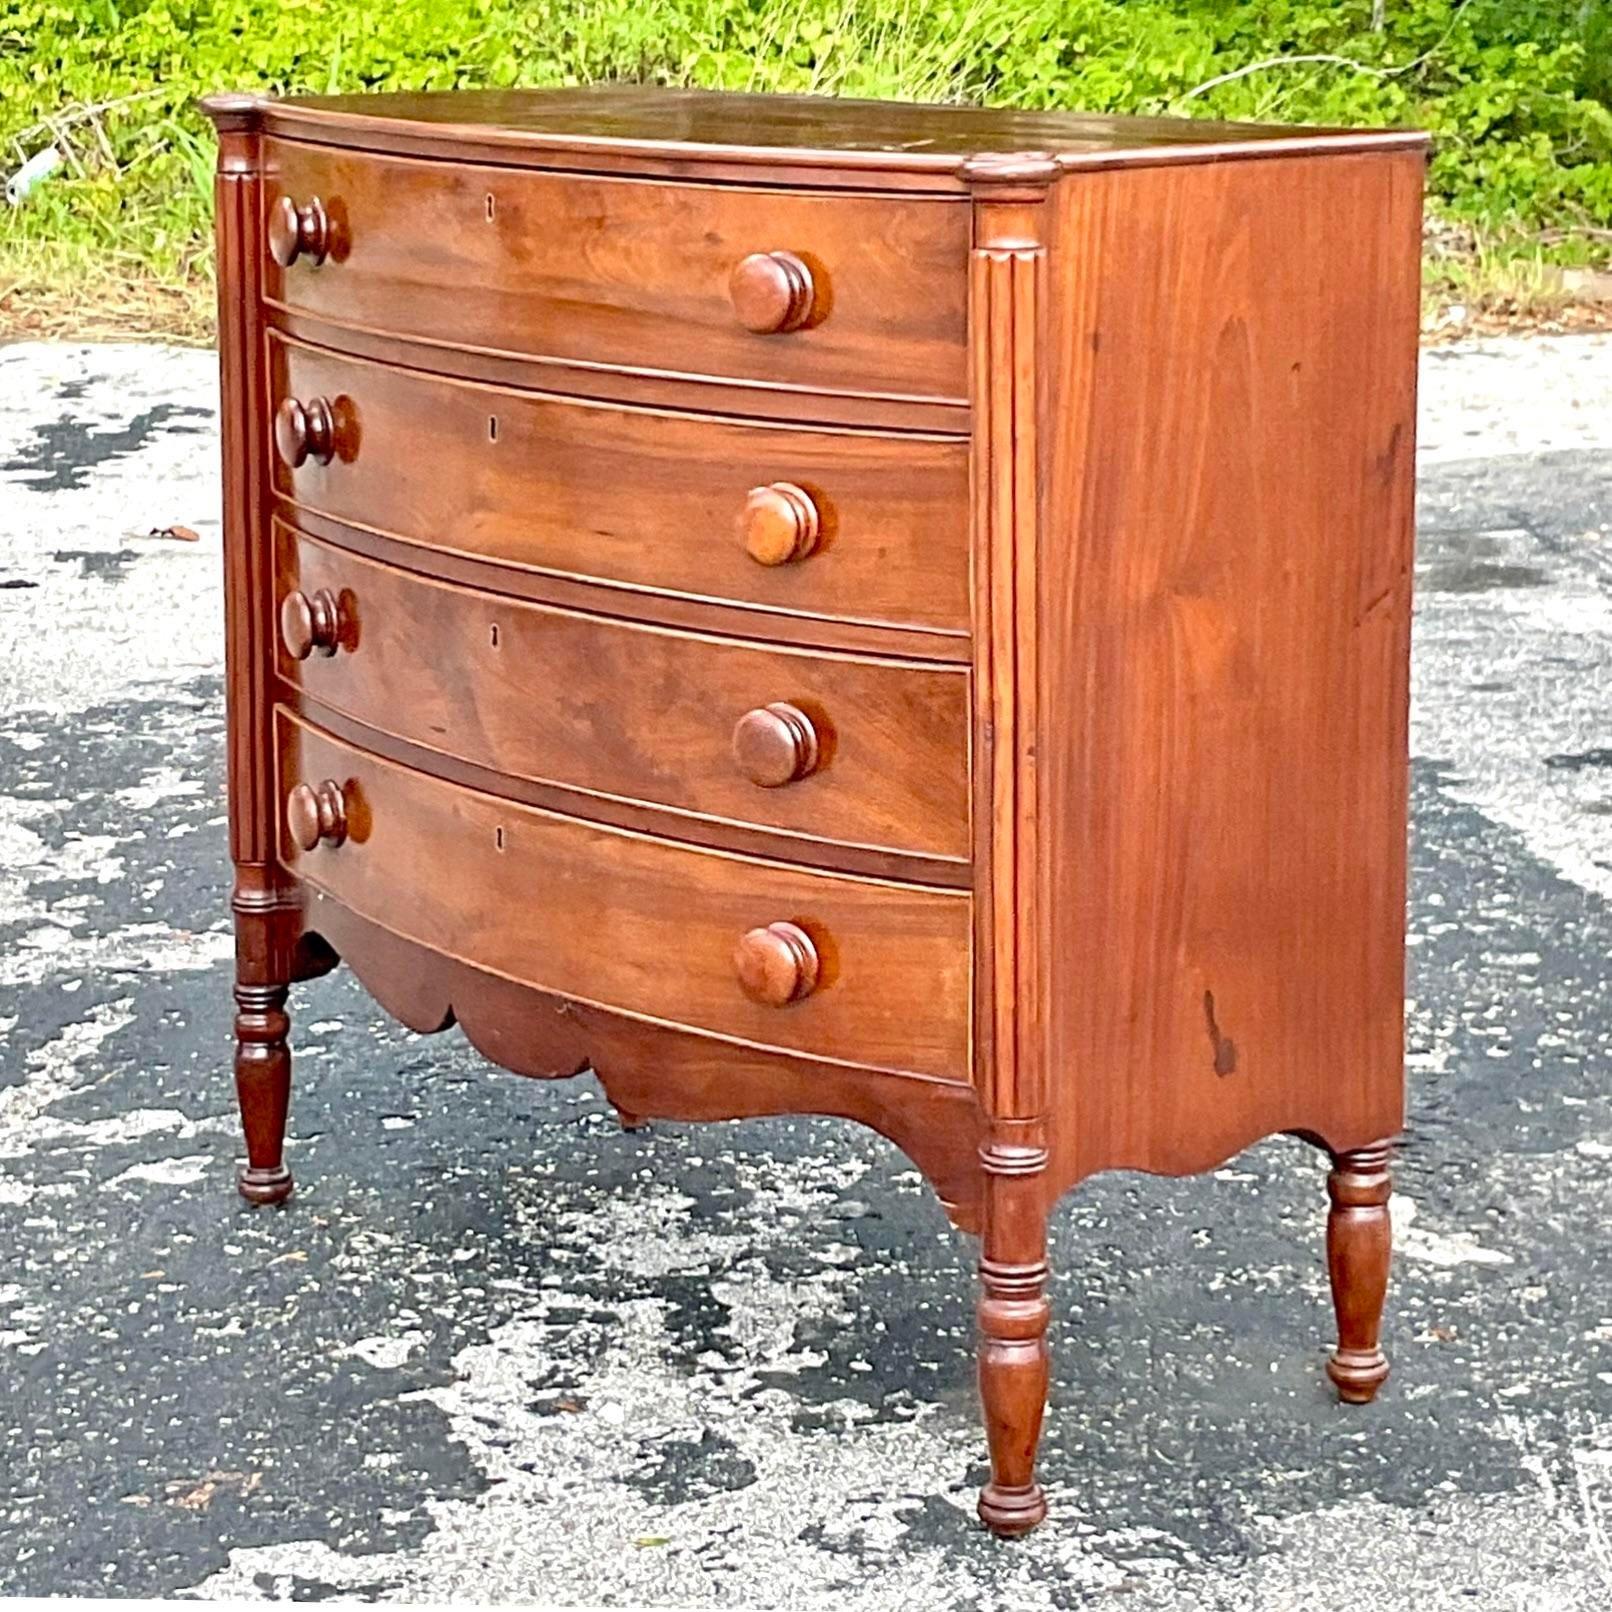 A stunning vintage Regency chest of drawers. A chic English mahogany bow front shape. Carved column detail at the corners. Acquired from a Palm Beach estate.